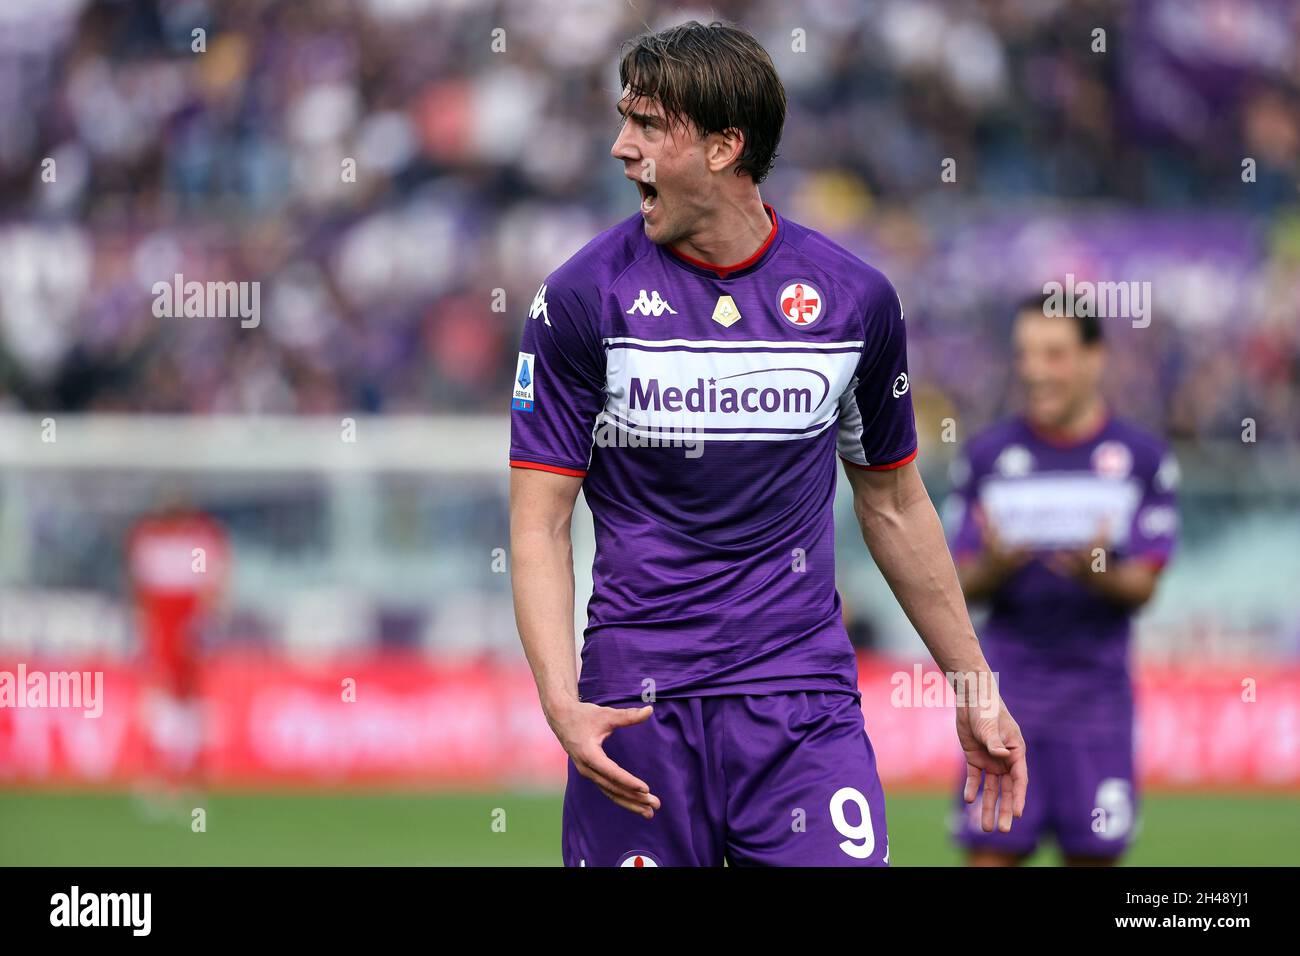 Fiorentina Fans Reaction to Dusan Vlahovic after returns to Stadio Artemio  Franchi 